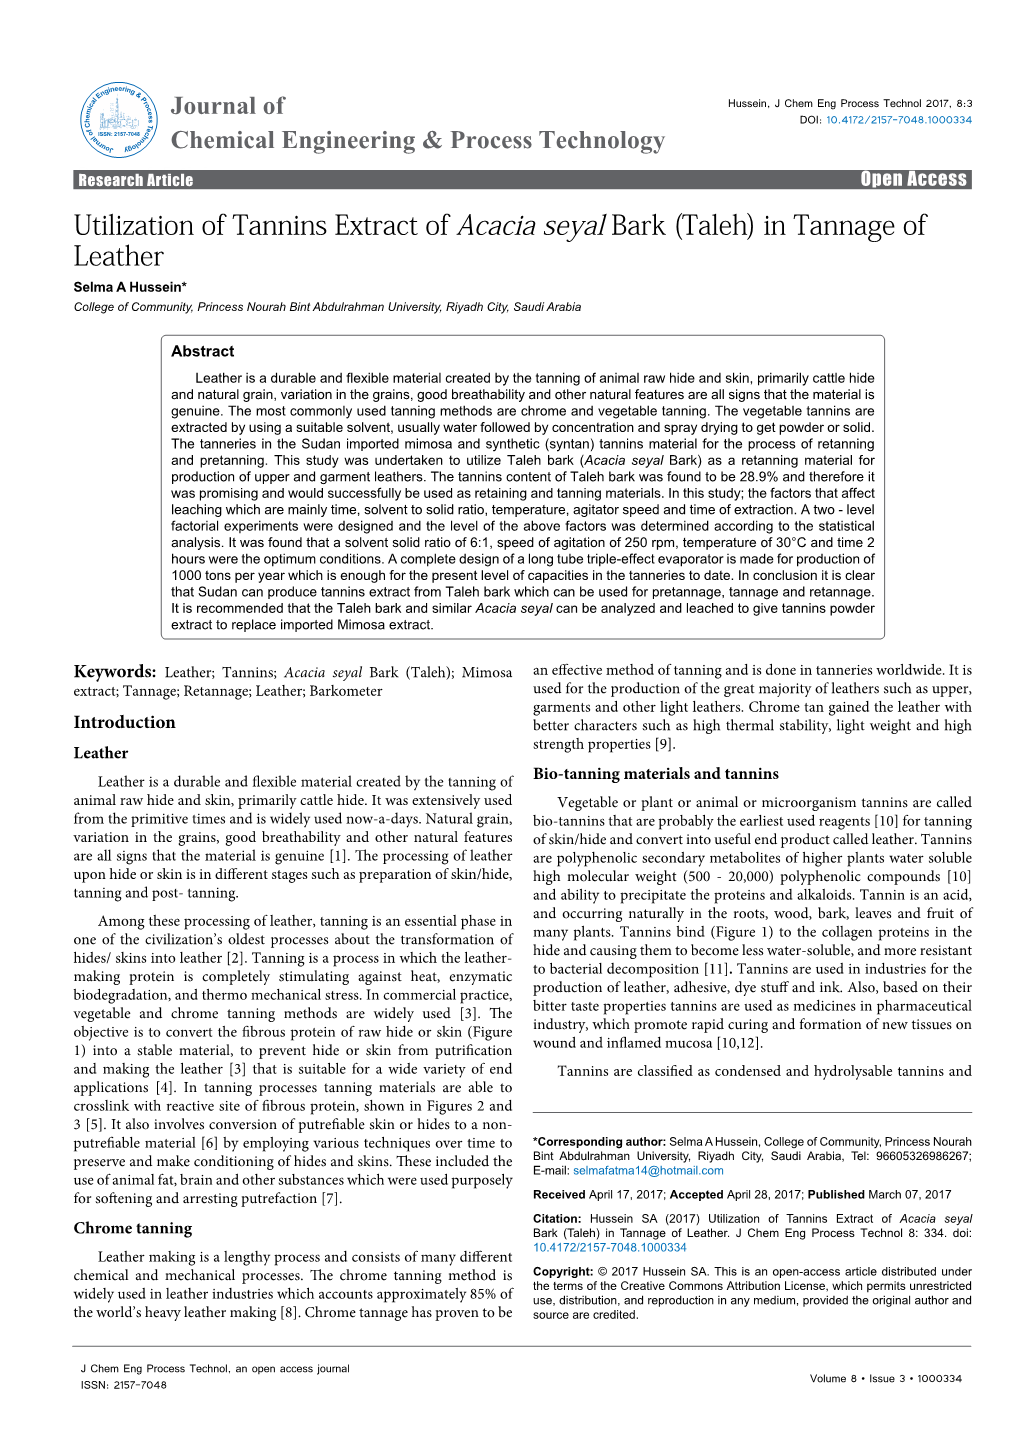 Utilization of Tannins Extract of Acacia Seyal Bark (Taleh) in Tannage Of